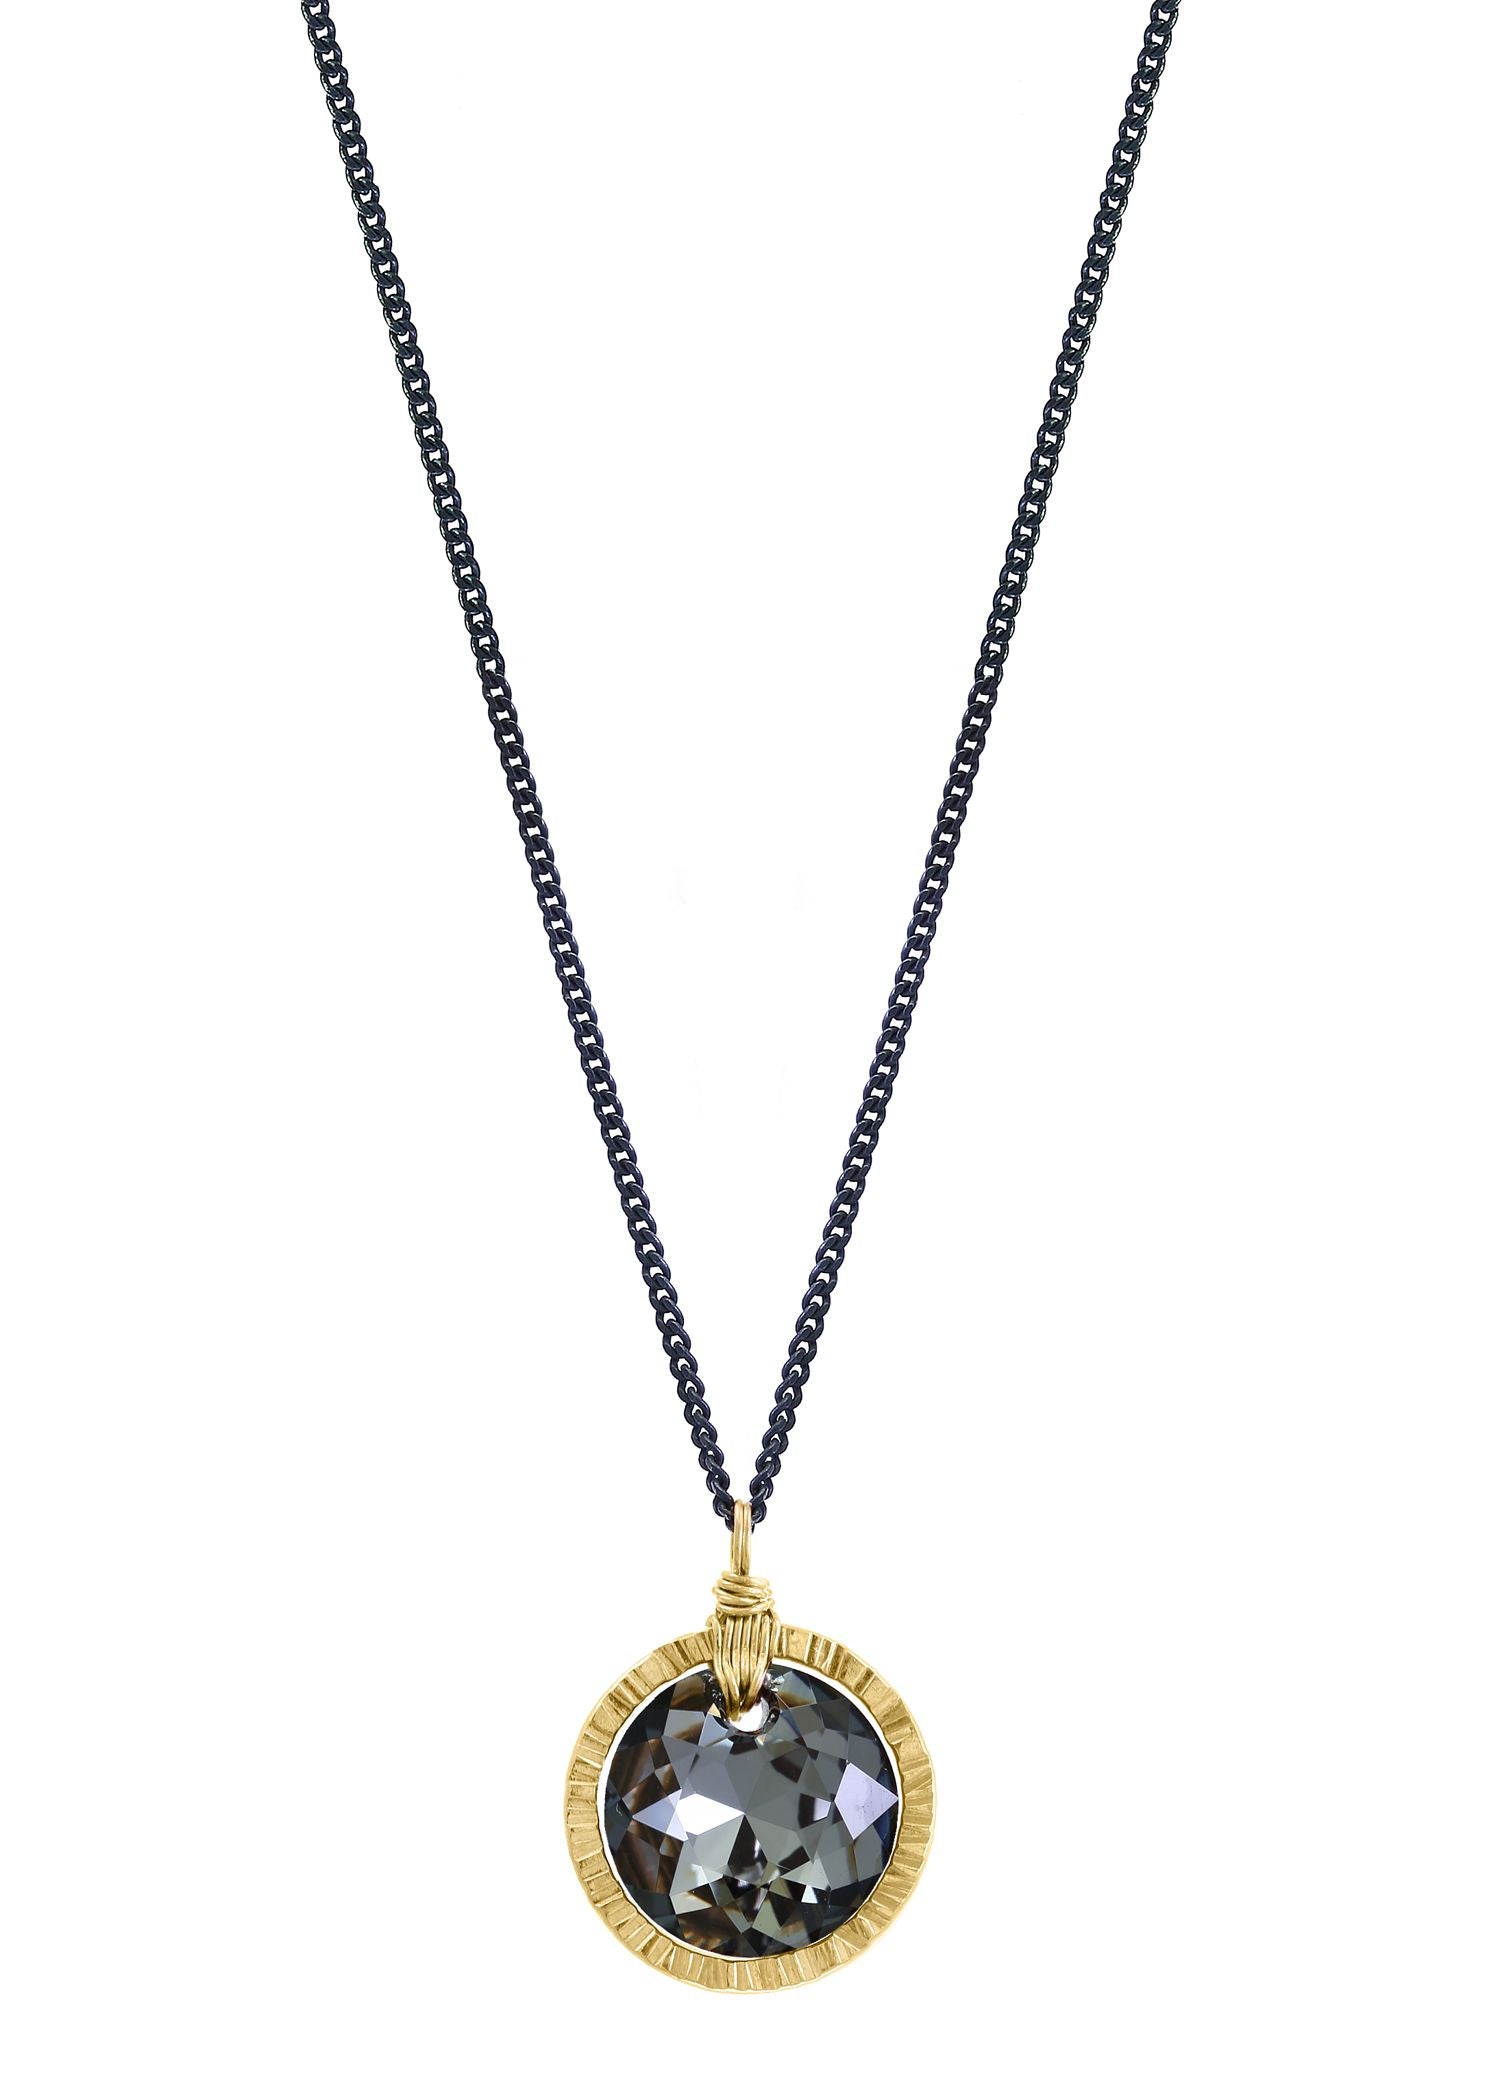 Crystal 14k gold fill Blackened sterling silver Necklace measures 18-1/4"  in length Pendant measures 1/2" in diameter Handmade in our Los Angeles studio